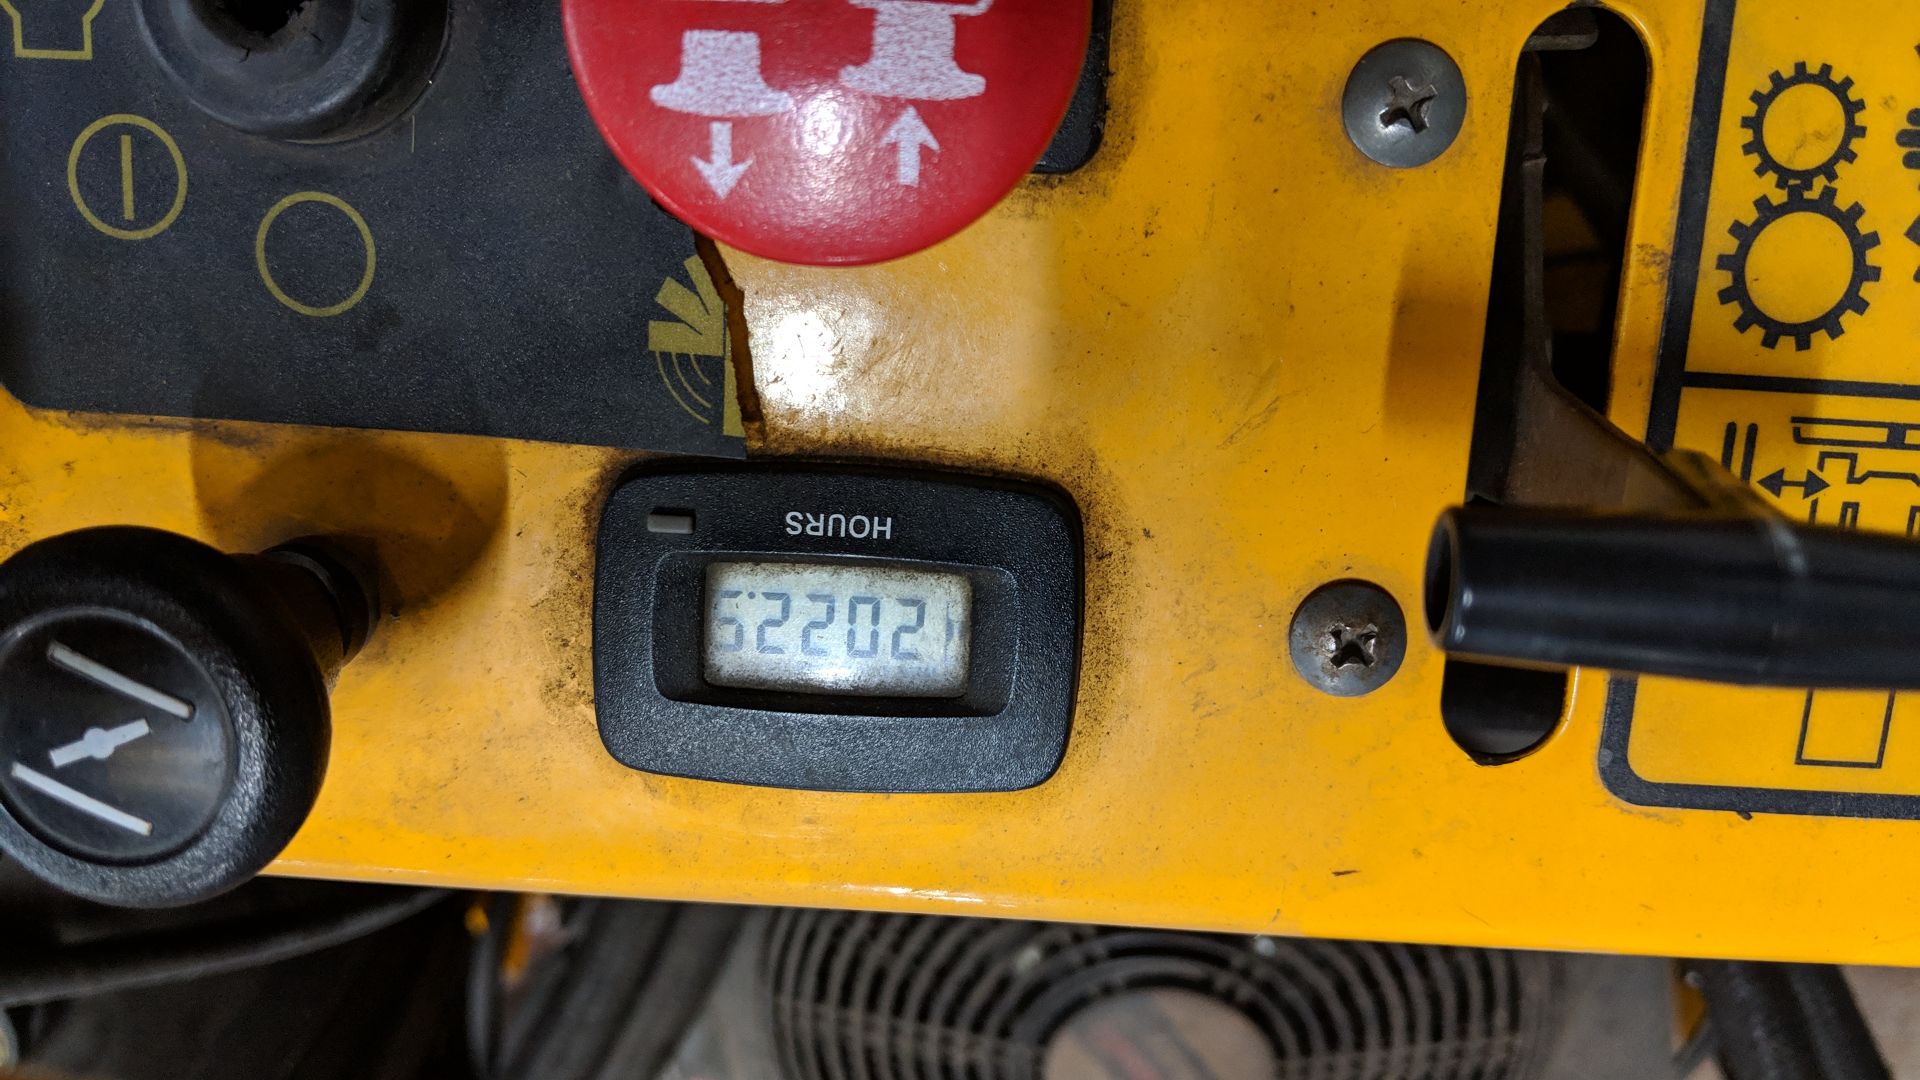 Hydro-gear ride-on rotary mower, hour gauge indicating 2,022.5 hours, powered by Kawasaki model - Image 9 of 21